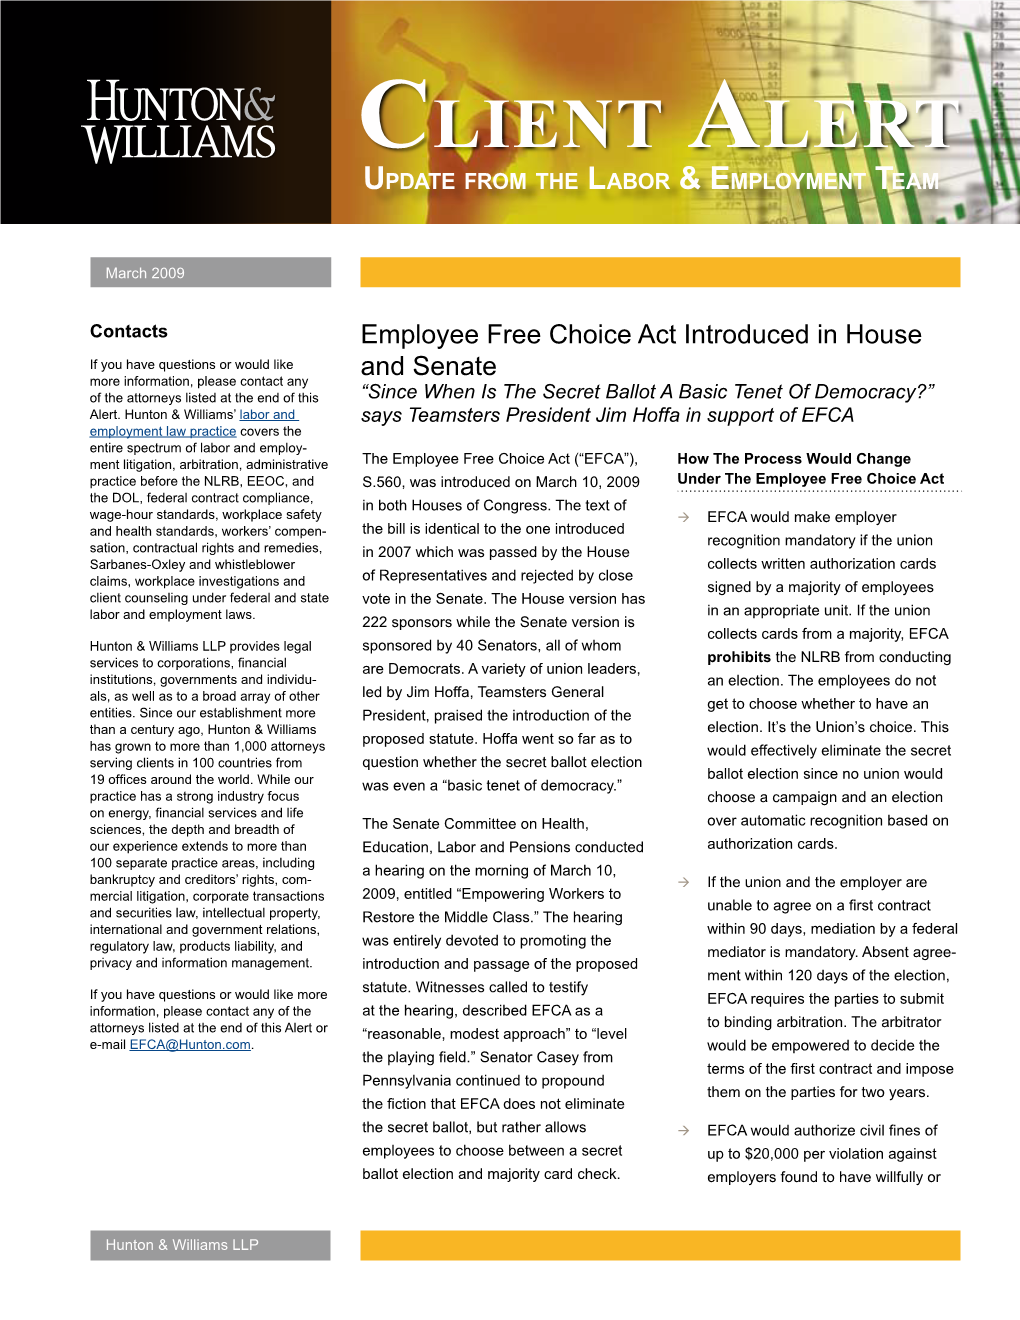 Employee Free Choice Act Introduced in House and Senate